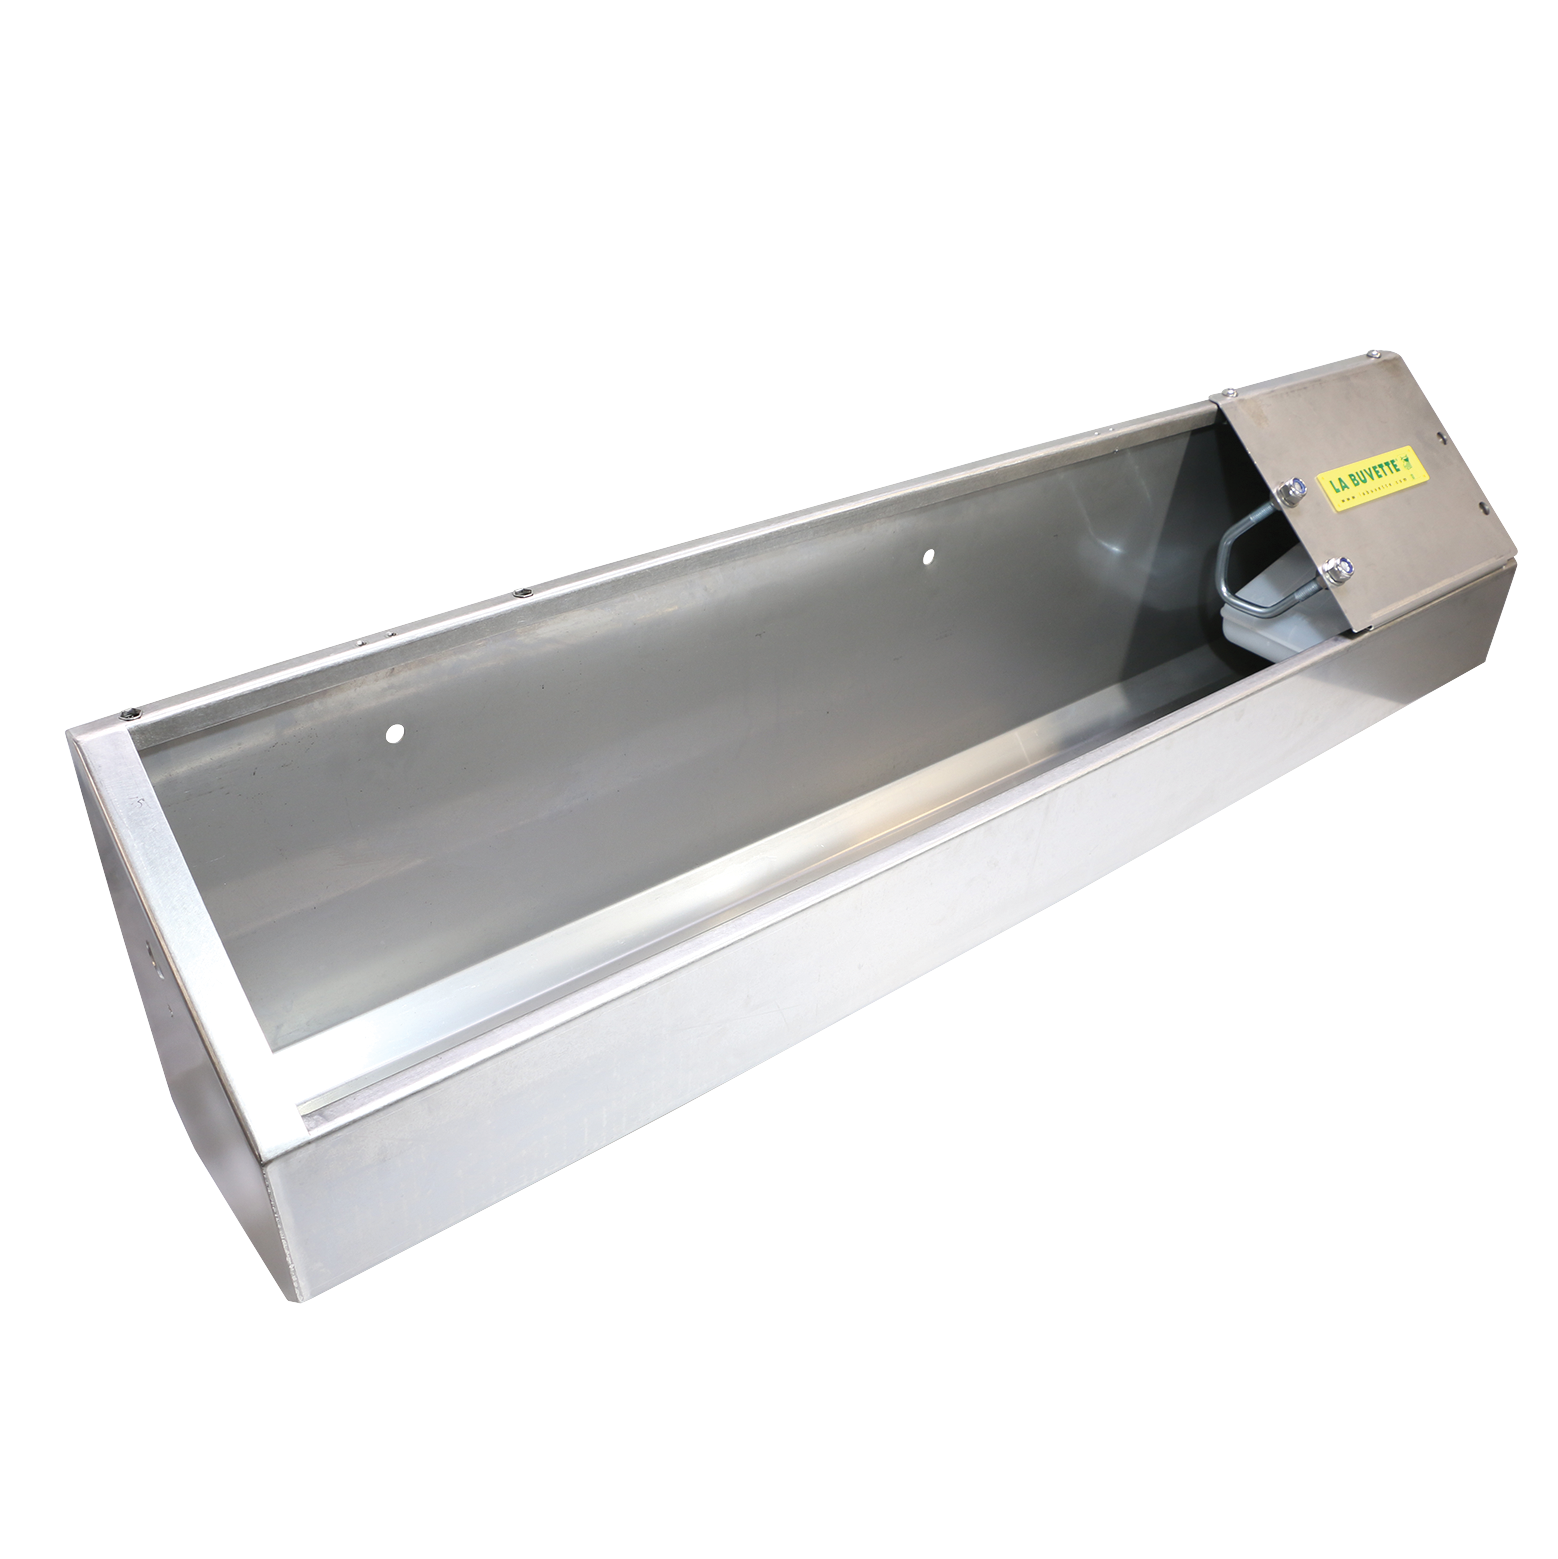 NEW OVICAP INOX 120 stainless steel TROUGH